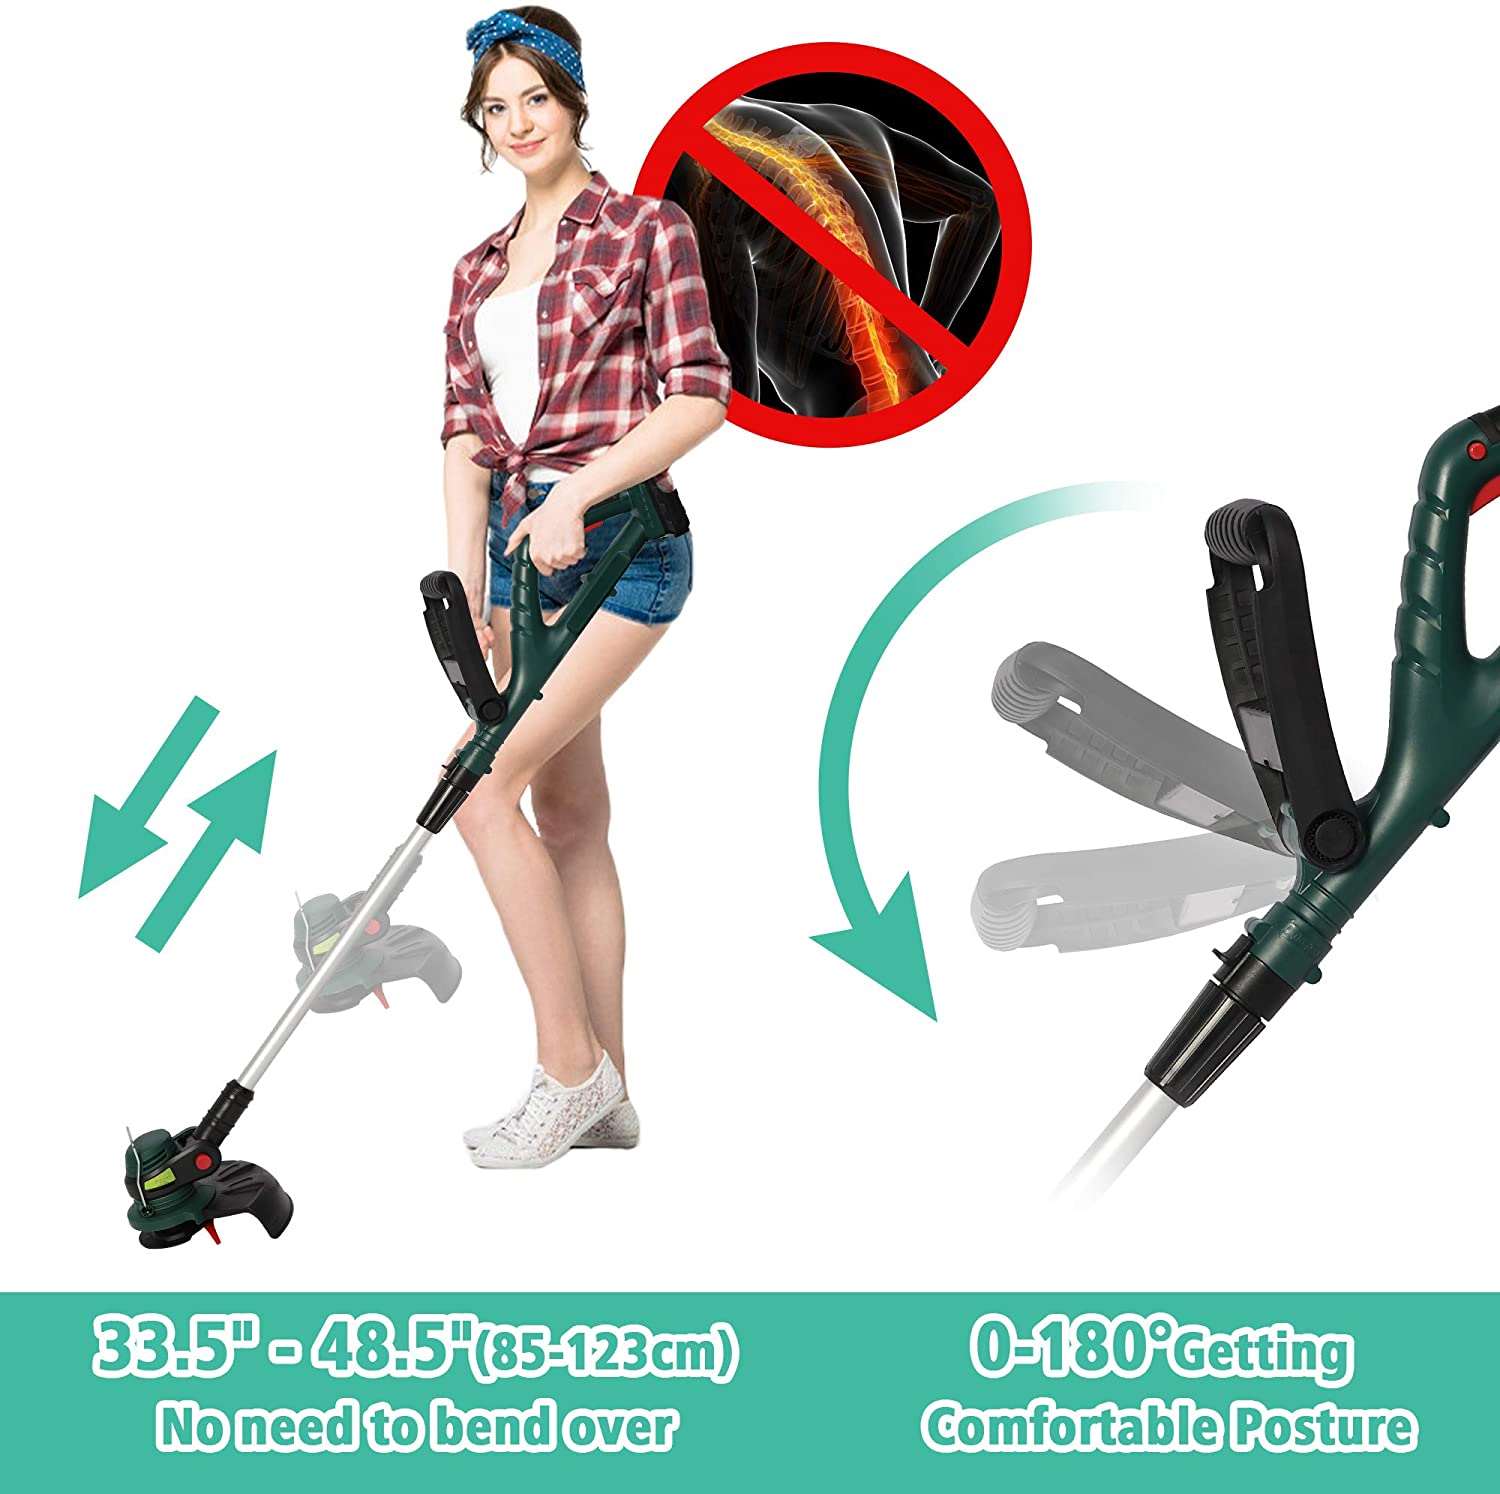 20V Cordless String Trimmer/Edger, 4.4 LBS, 70min Lithium-Ion Brushless Trimmer, yard, w/auto Feed, Extension Pole, Adjustable Head & Handle, 10” Cutting Path, 2.0Ah Battery & Charger Included